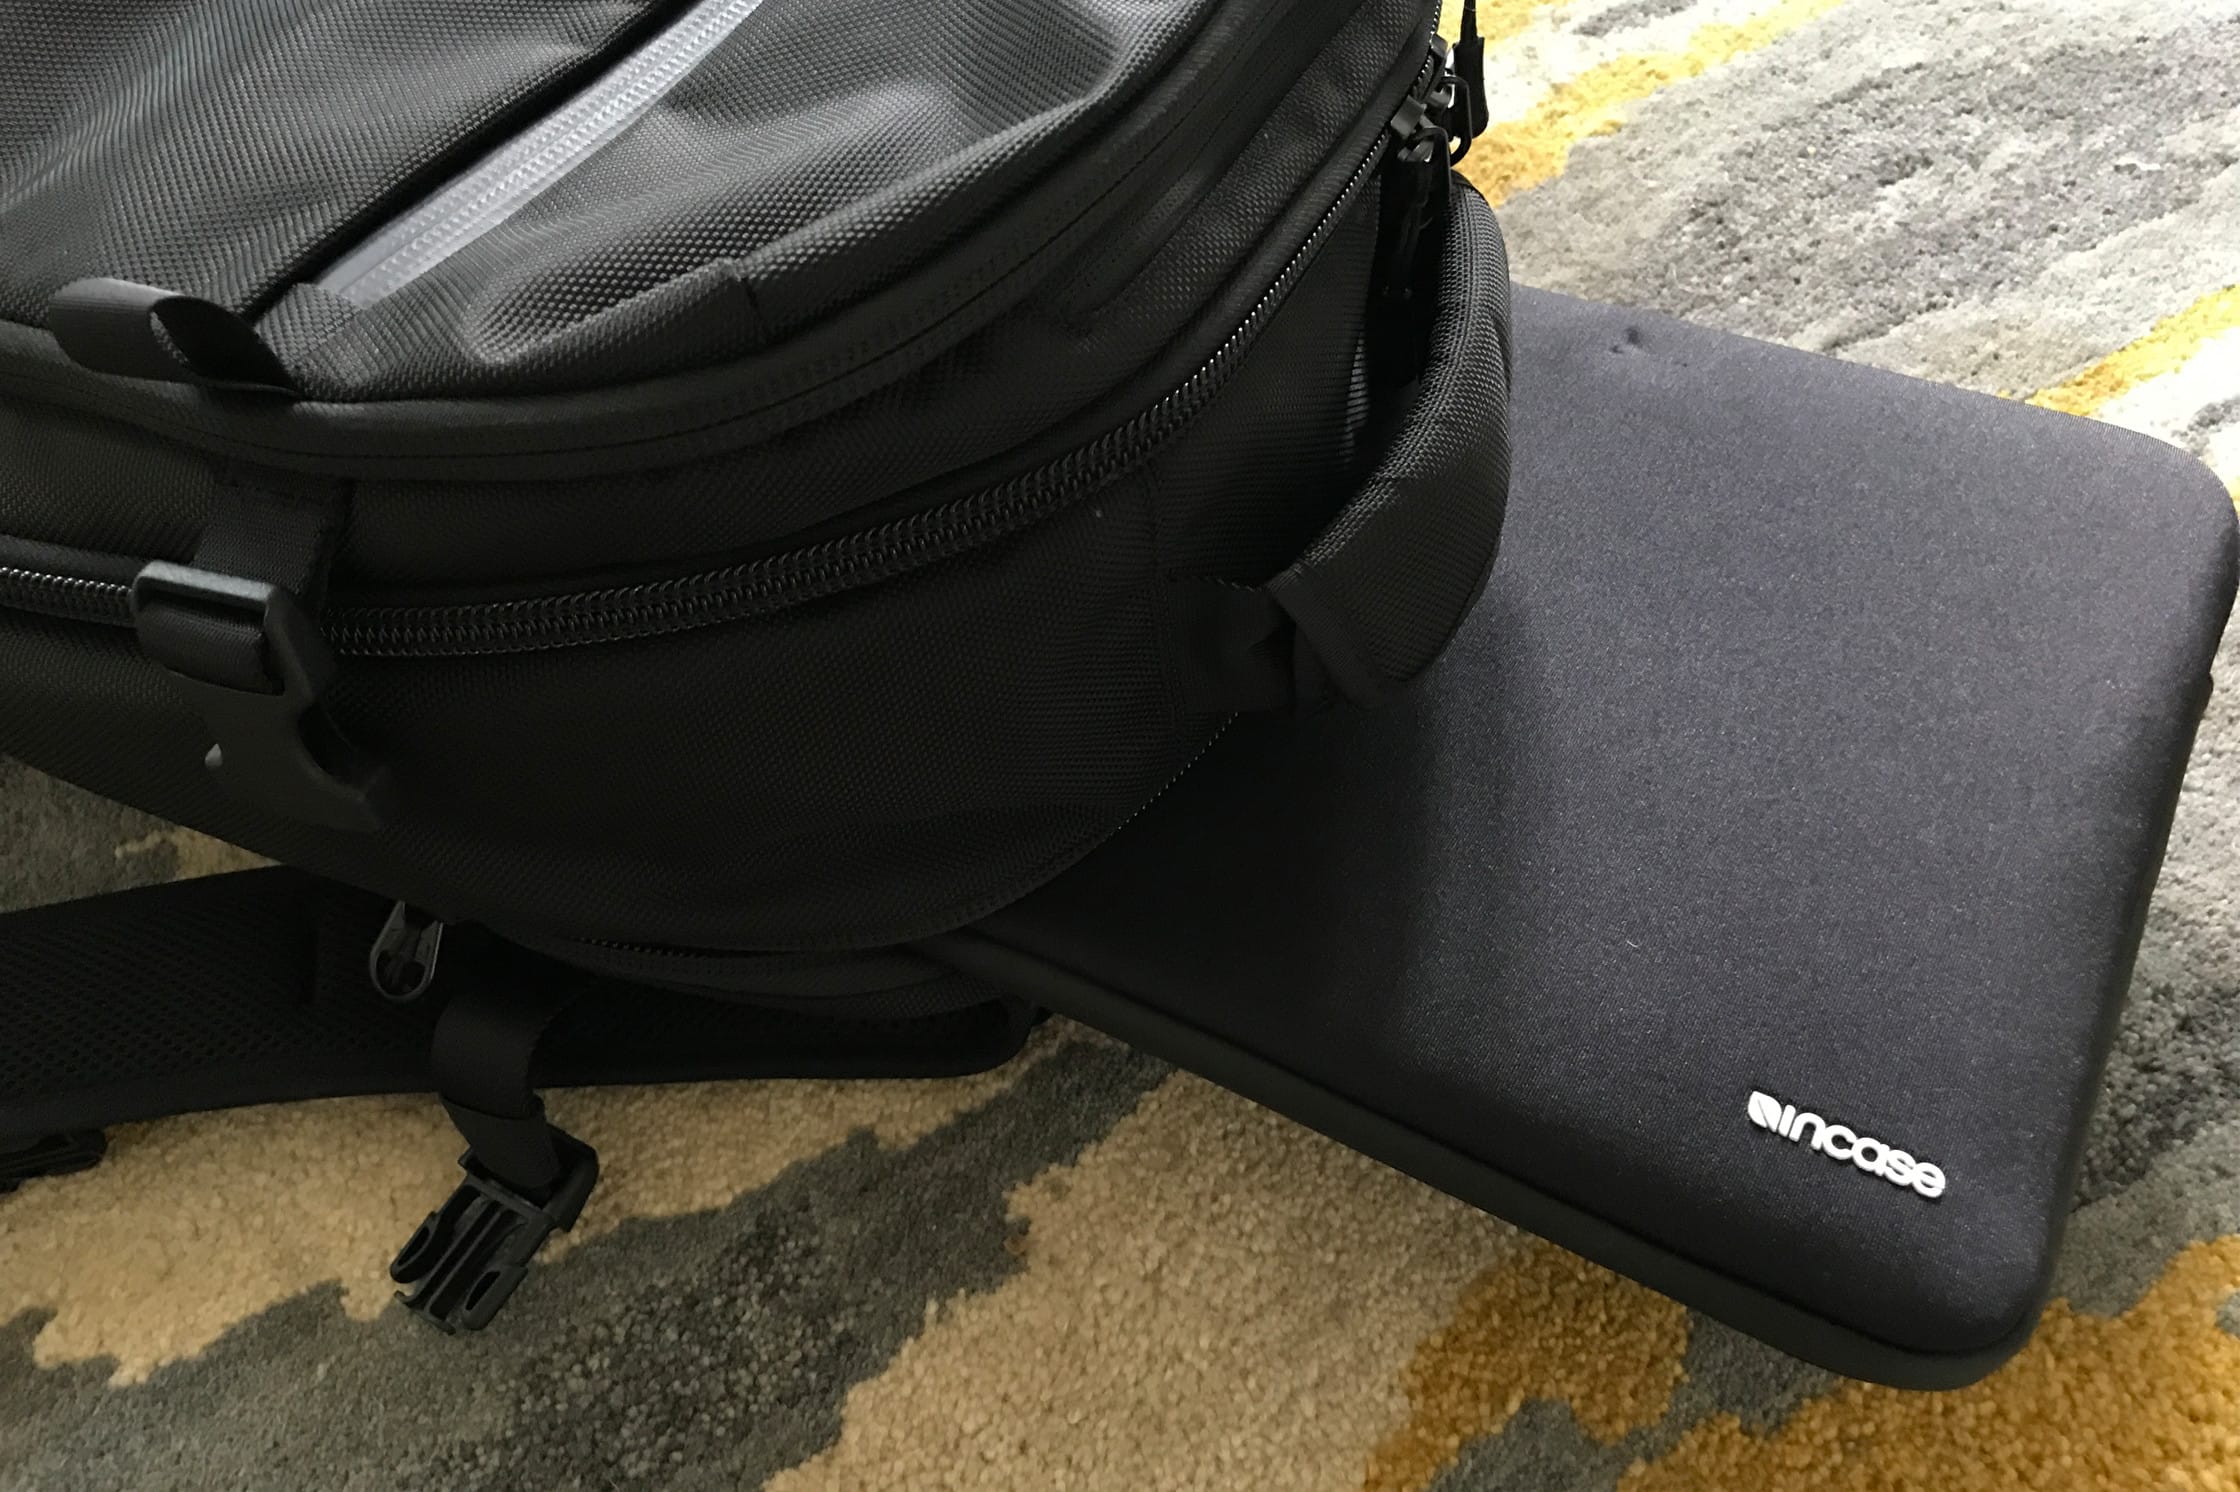 Aer Travel Pack Laptop Compartment